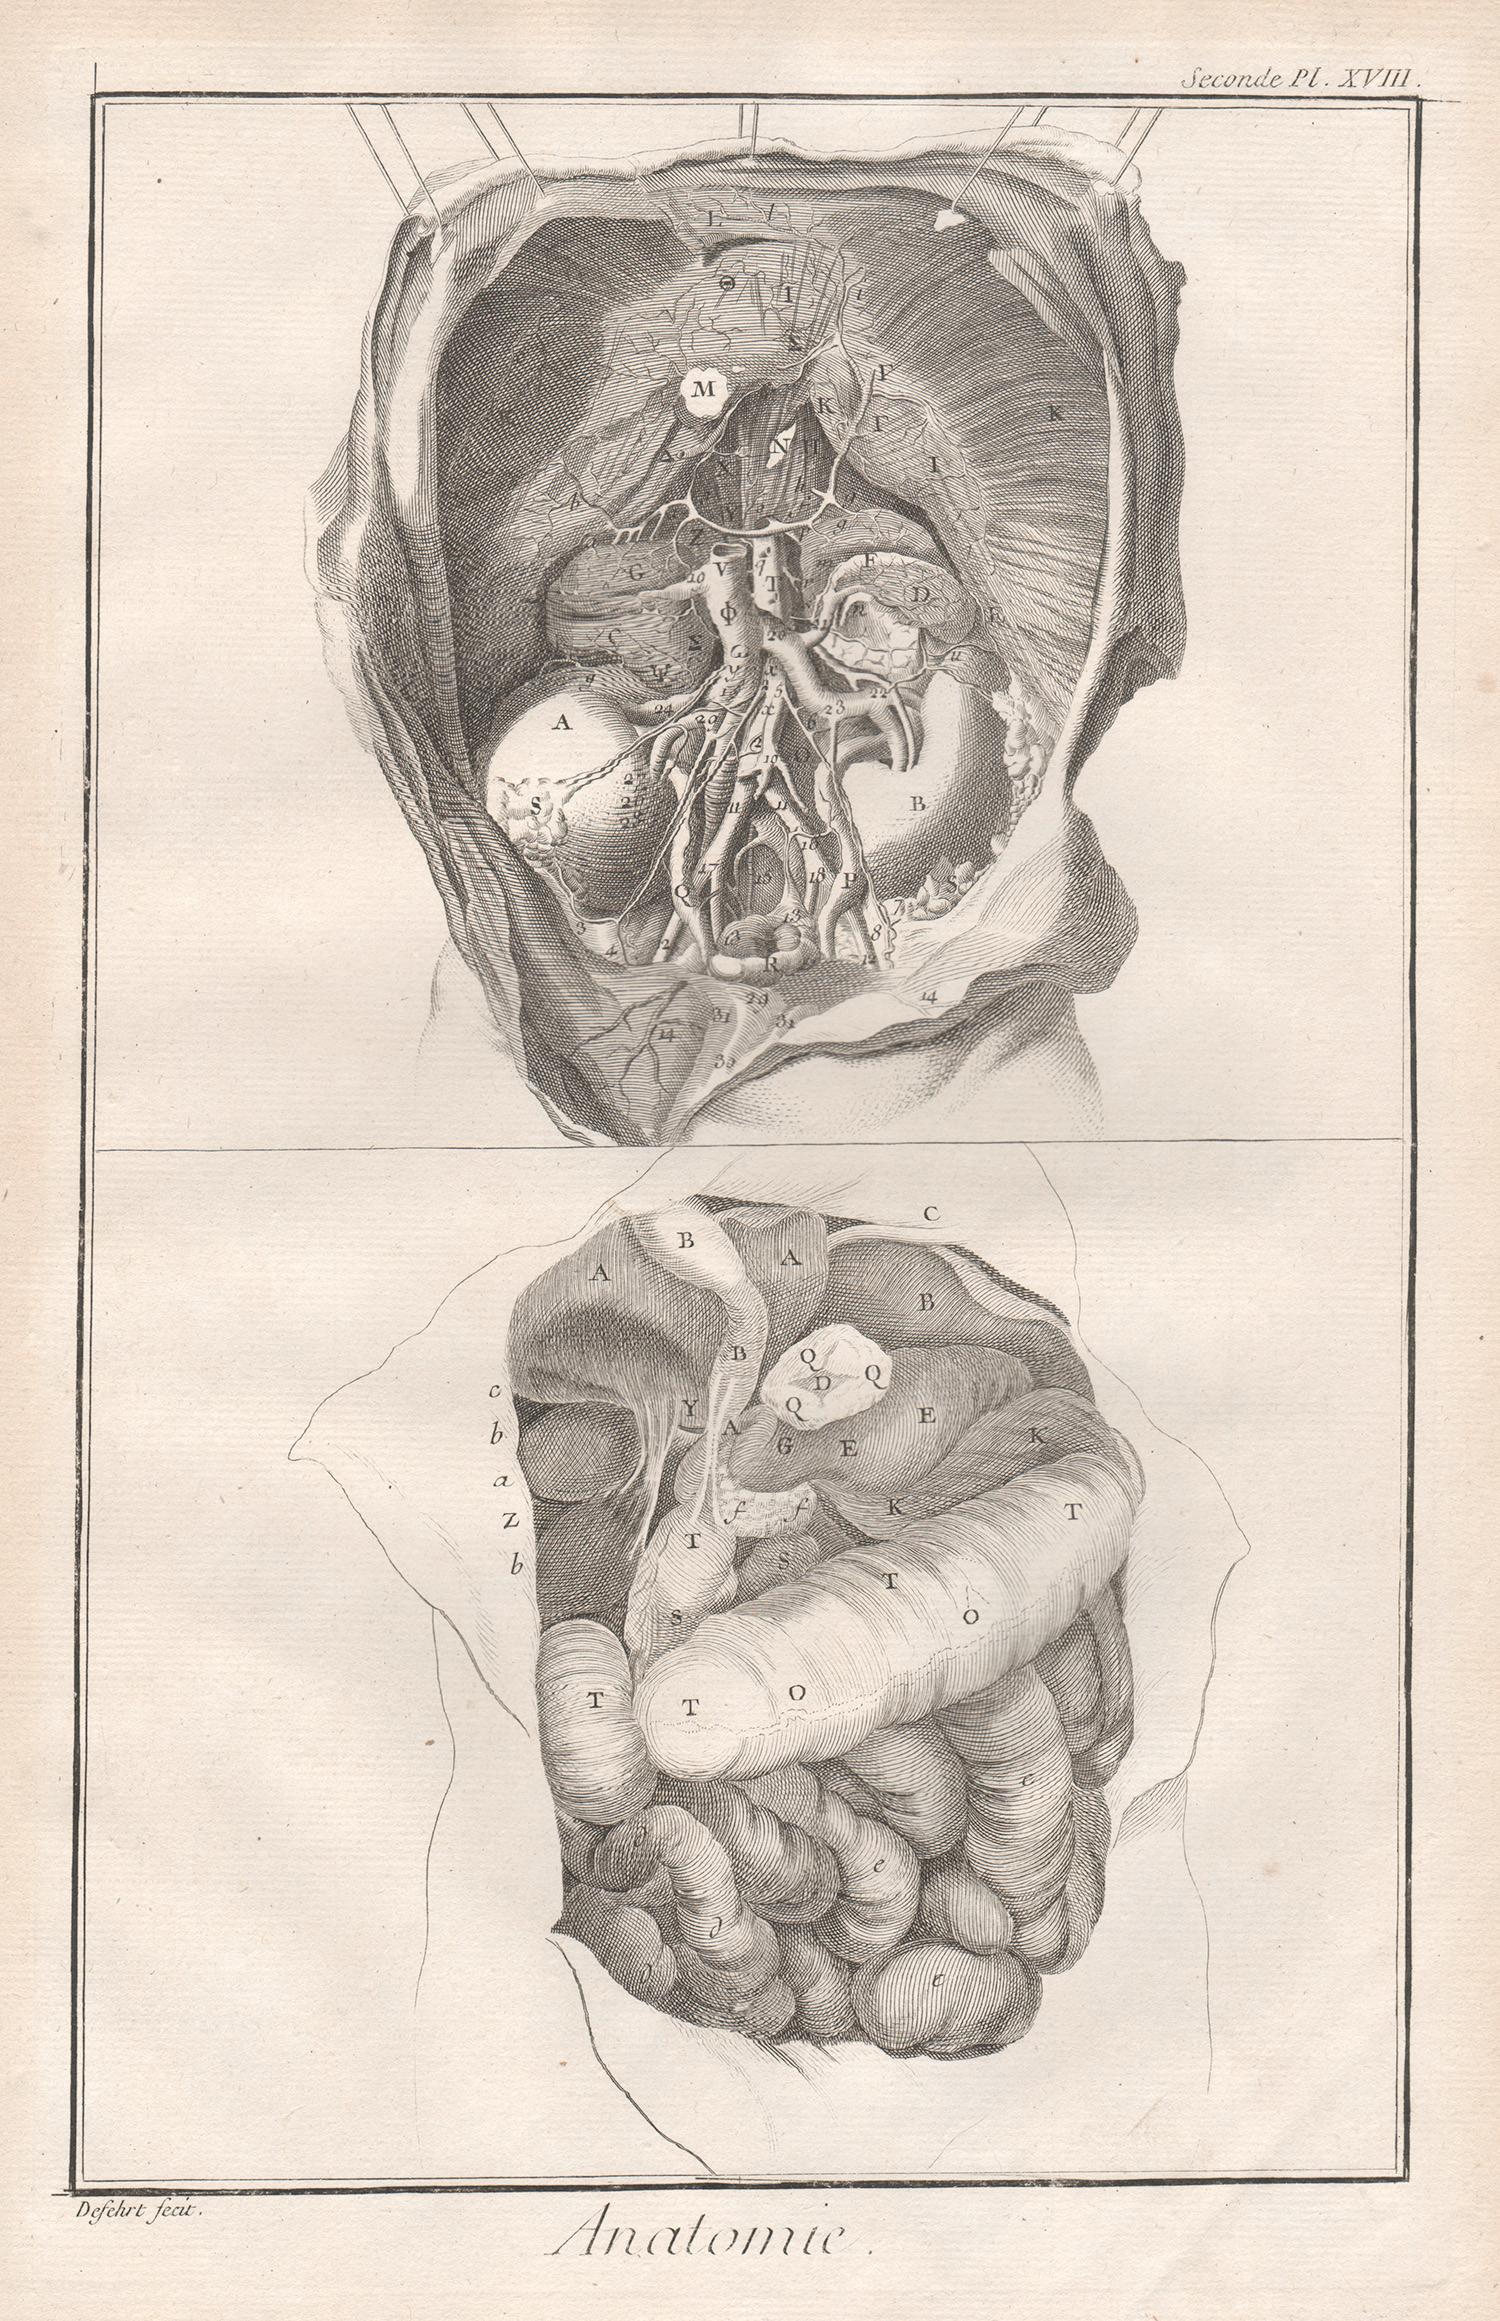 Unknown Print - 'Anatomie' - The Kidneys, French anatomy medical engraving, c1770